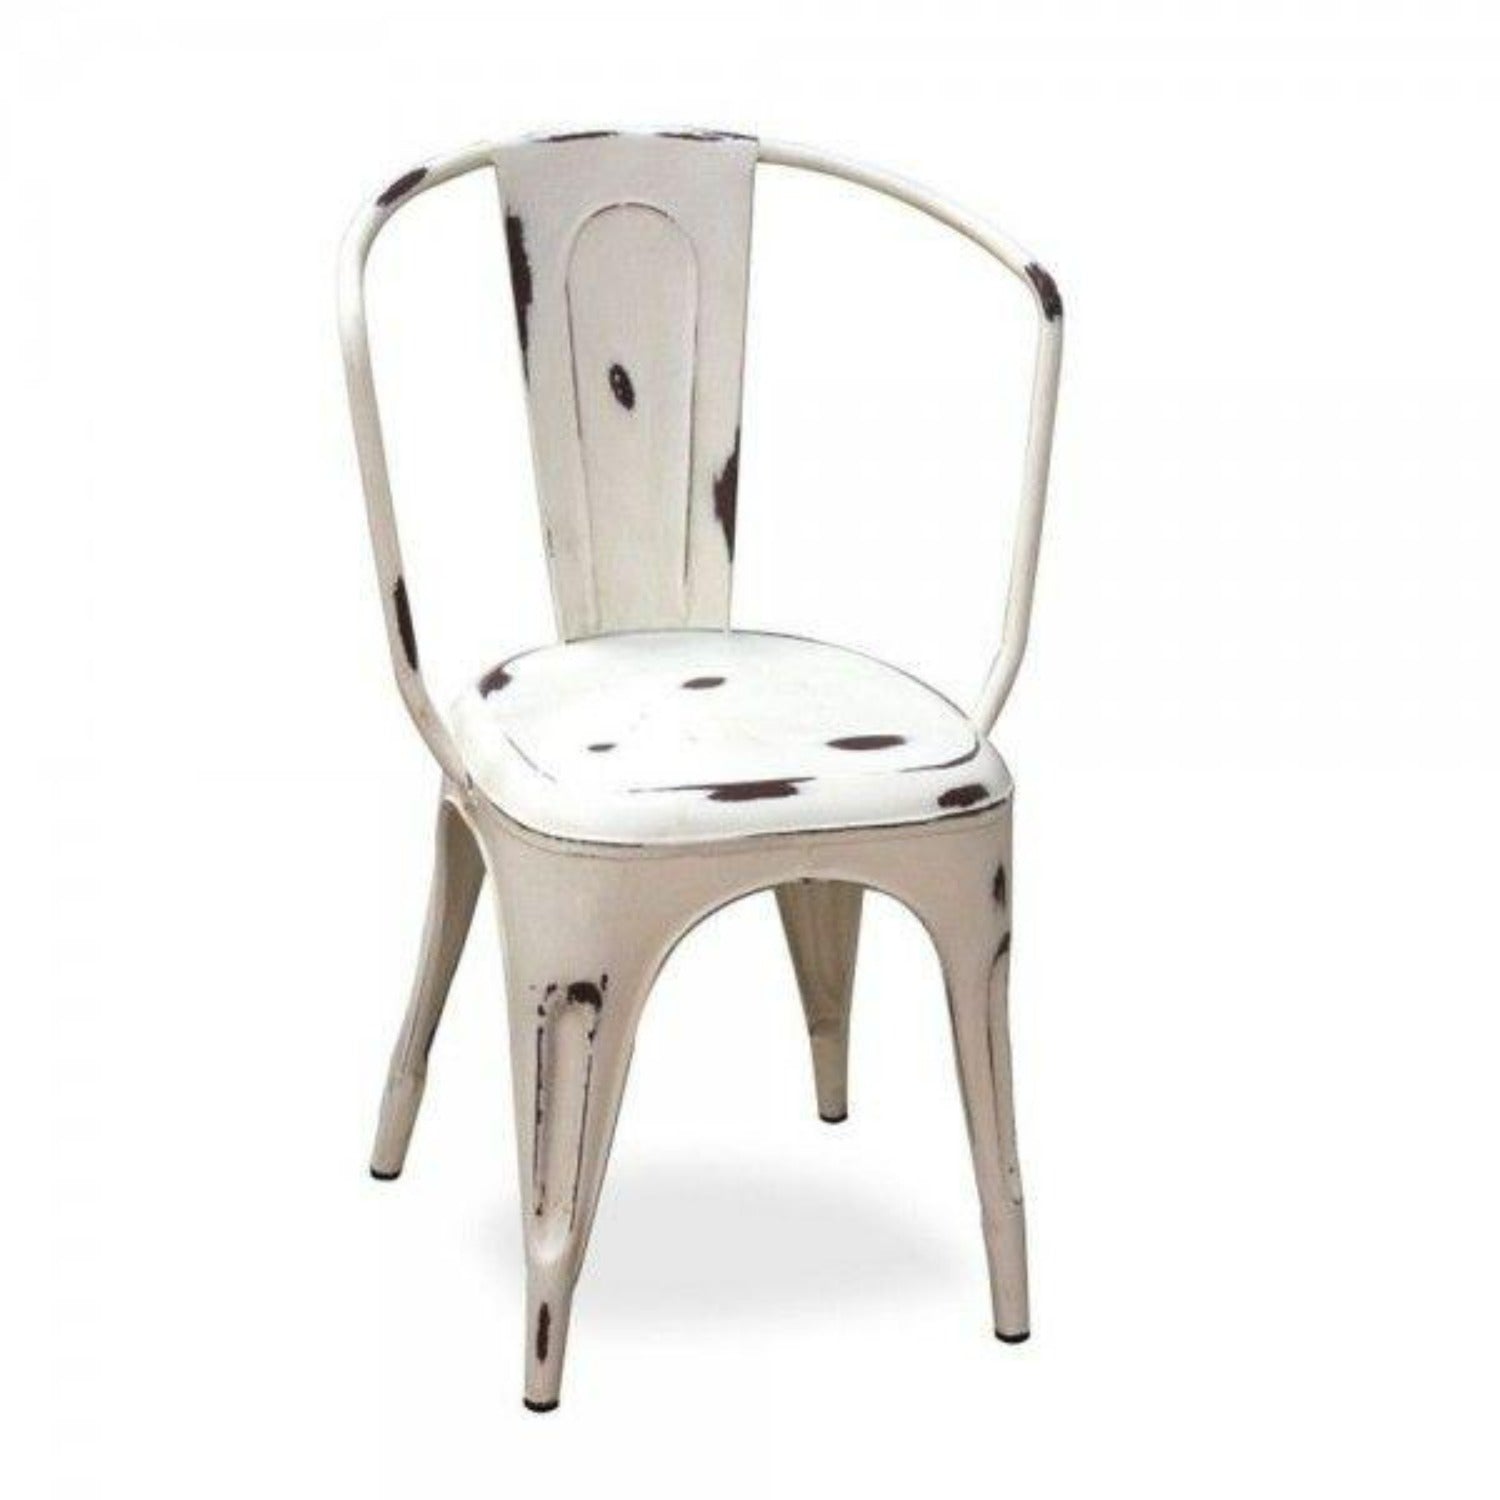 White Distressed Metal Chair